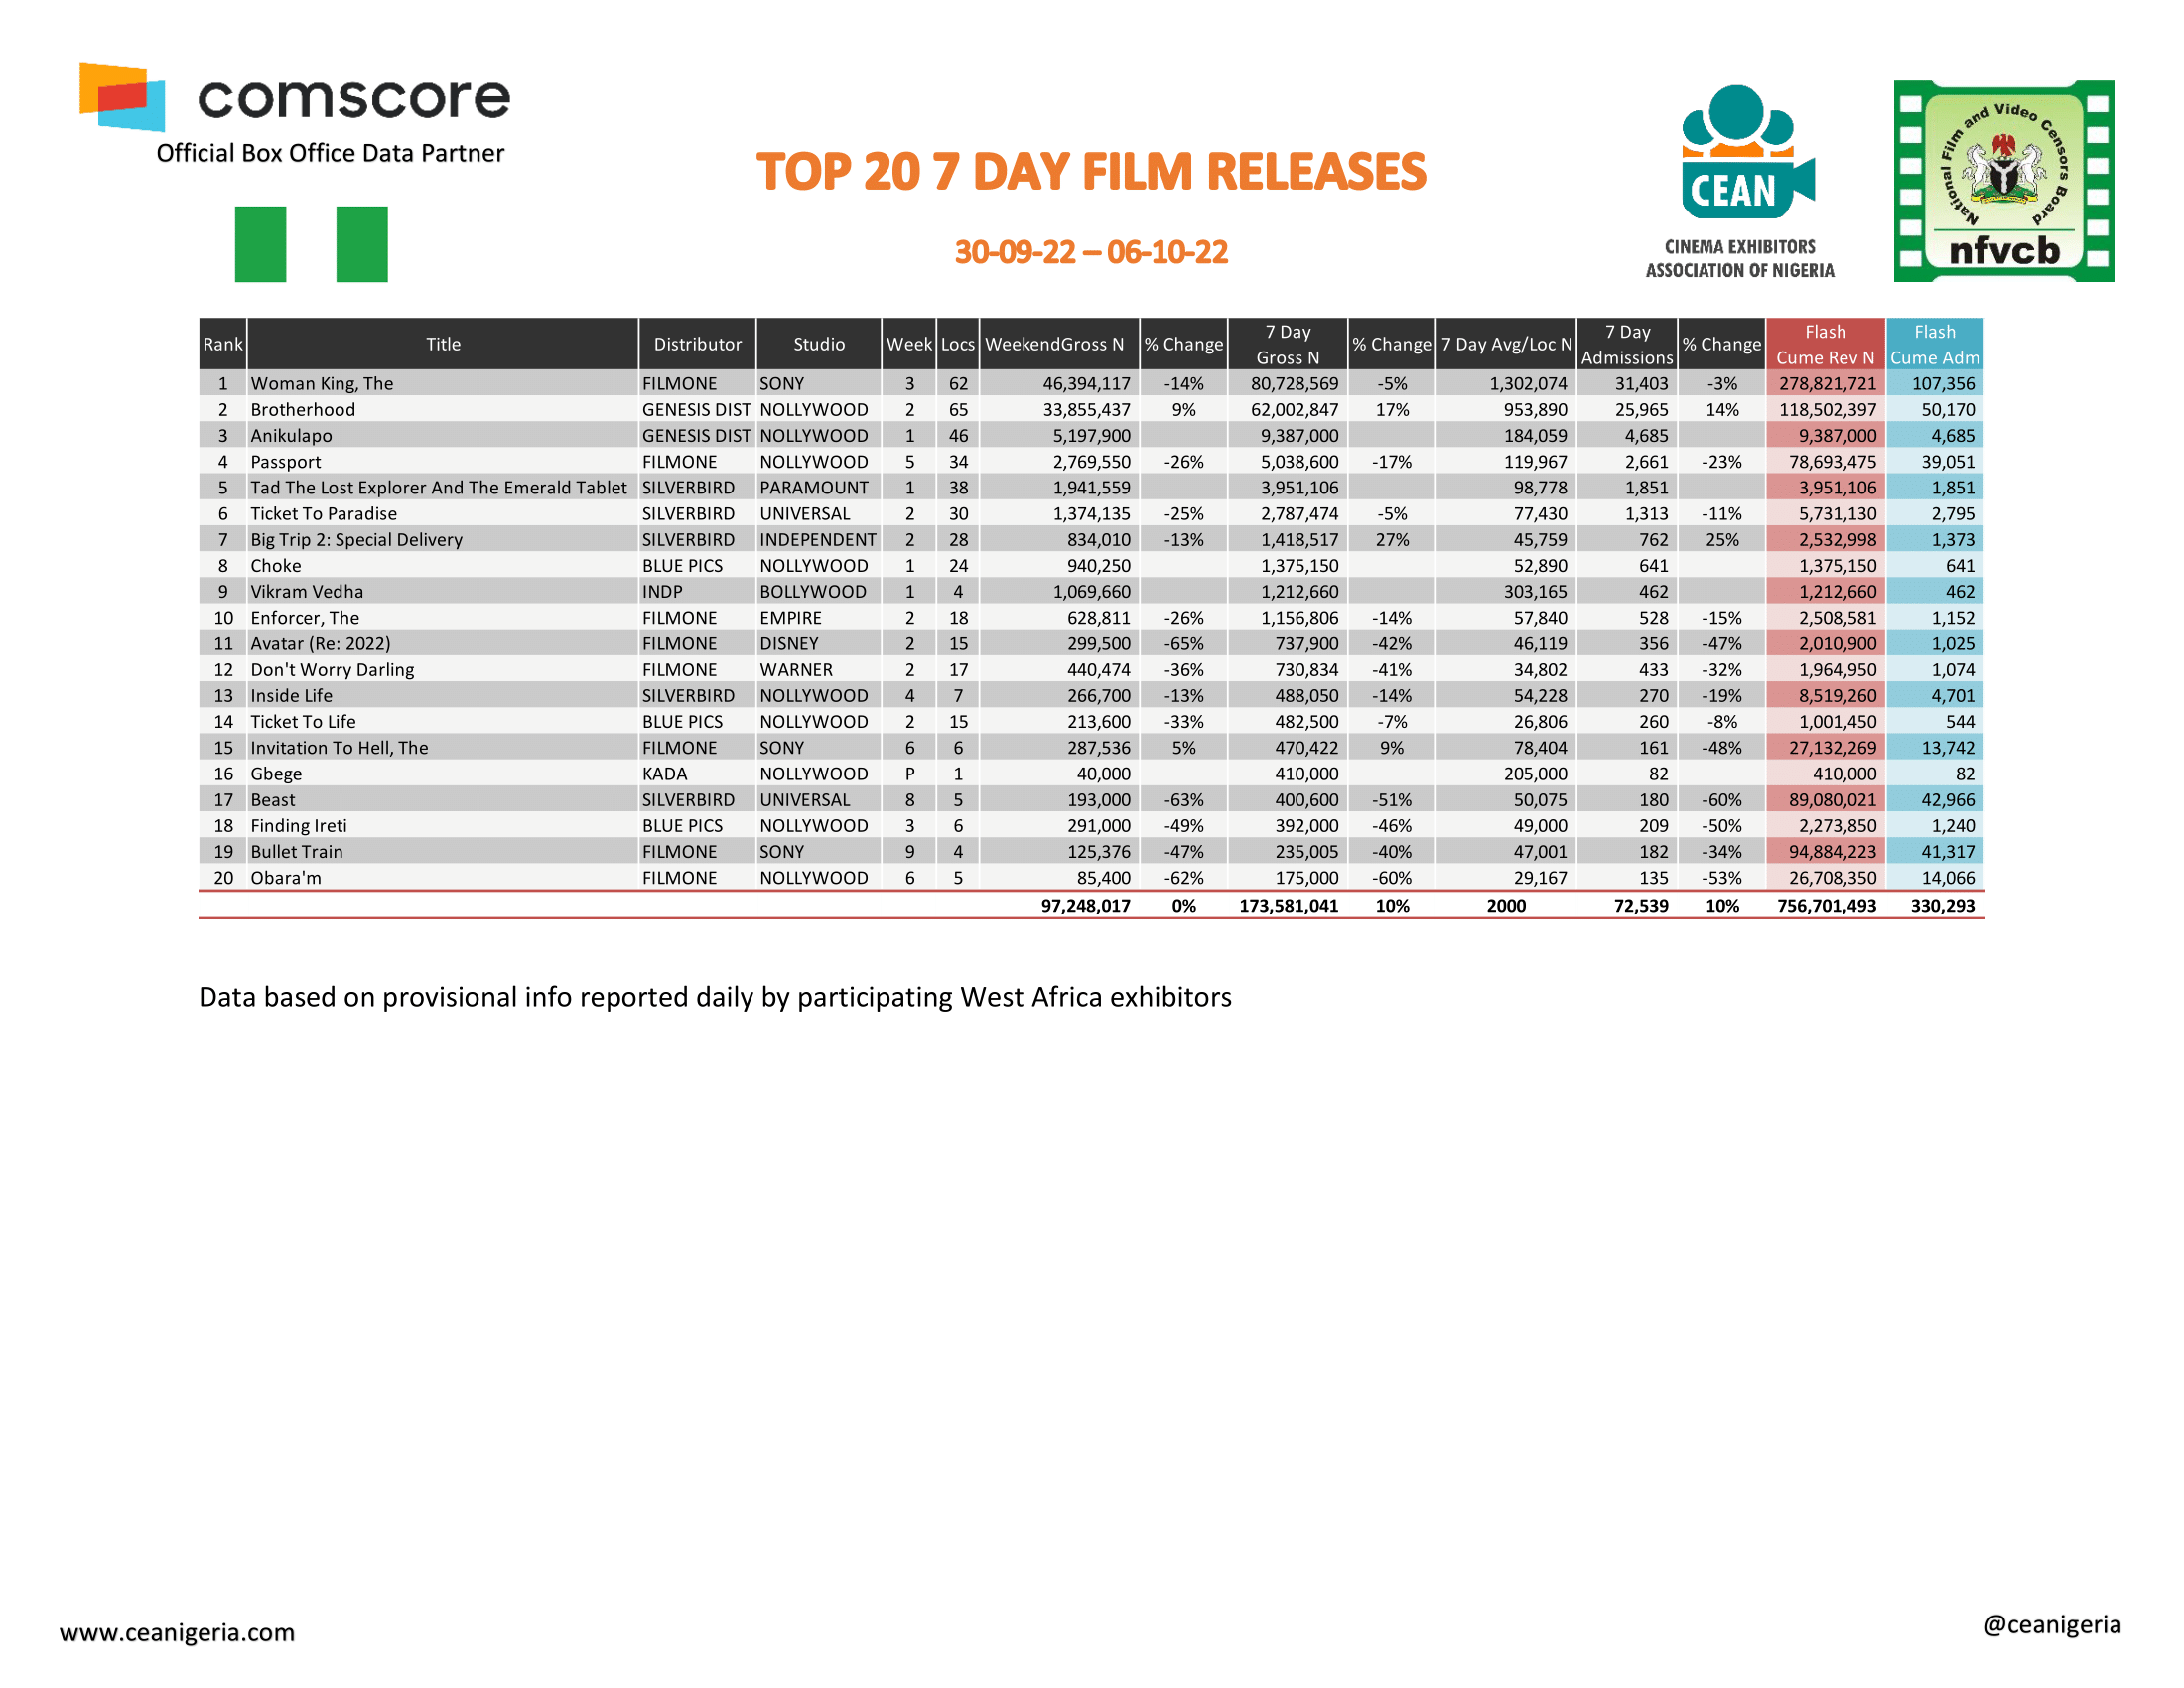 Top 20 films 7 Day 30th September 6th October 1